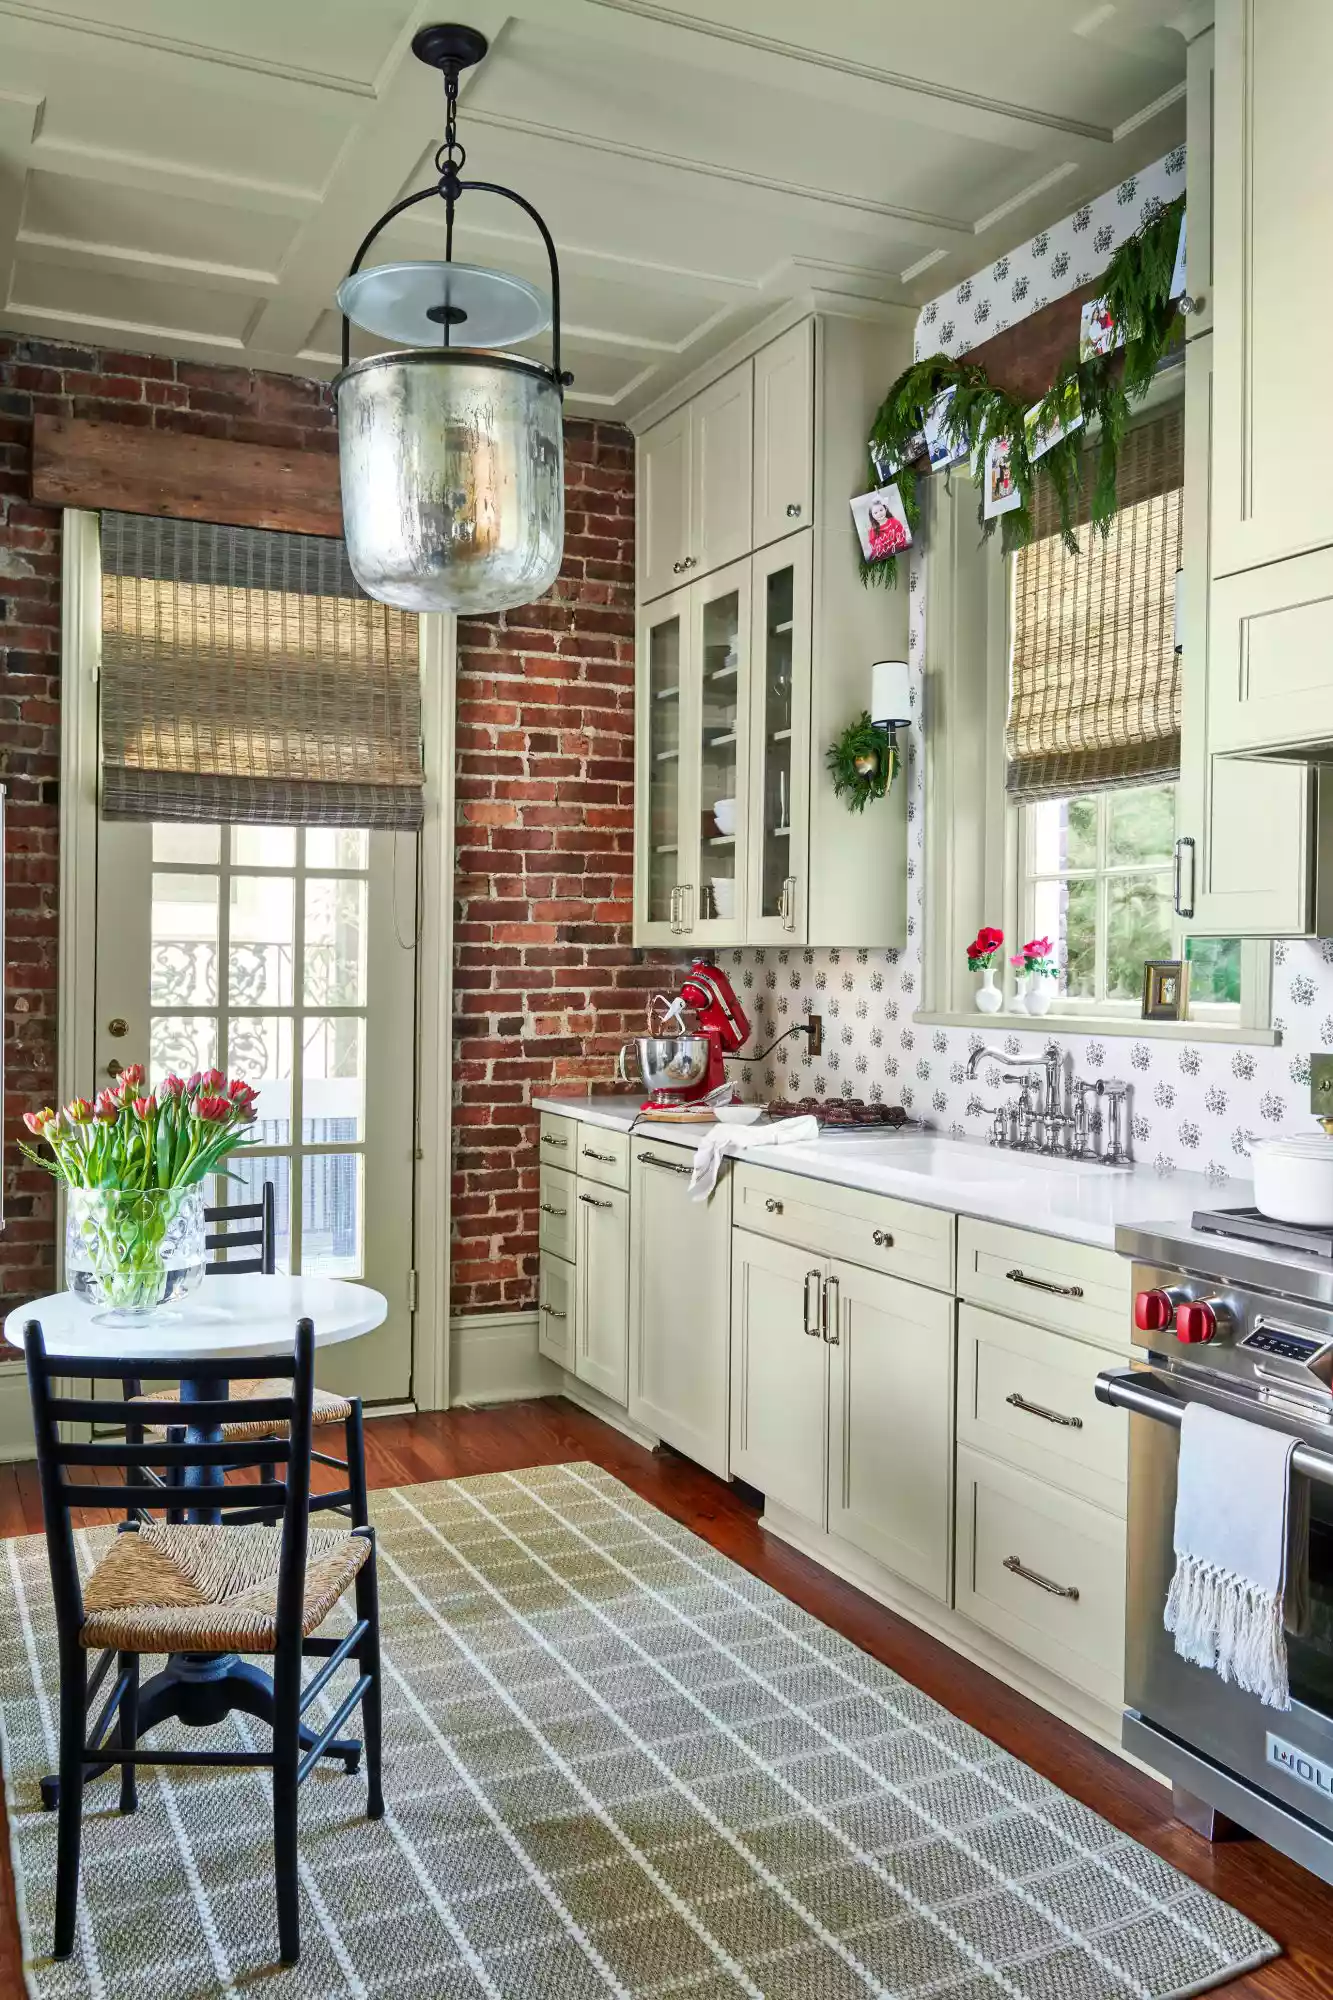 Galley kitchen with light green cabinetry and exposed brick wall